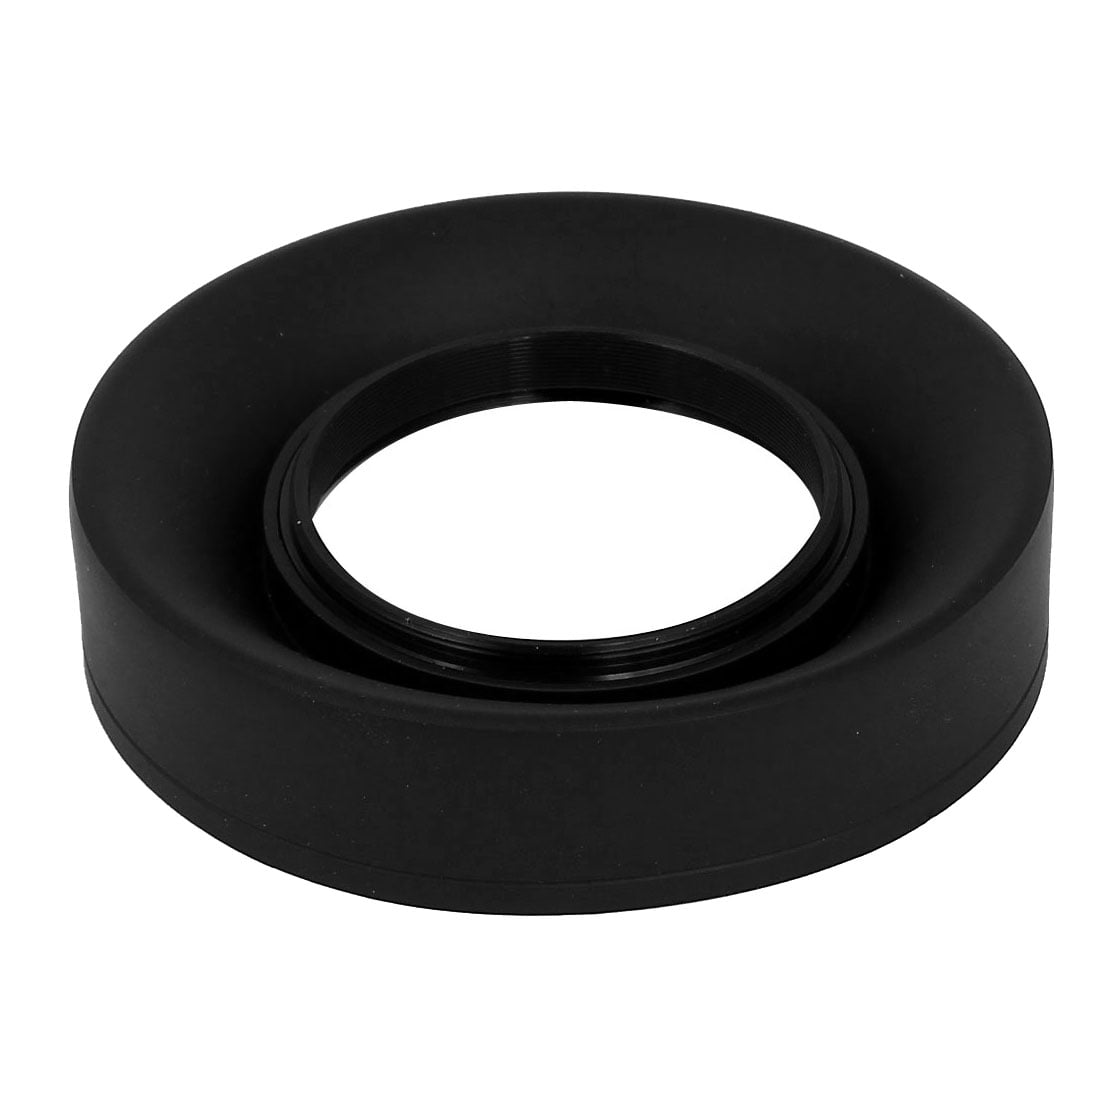 55mm Collapsible Rubber Hood for lens with 55mm screw thread UK SELLER!! 